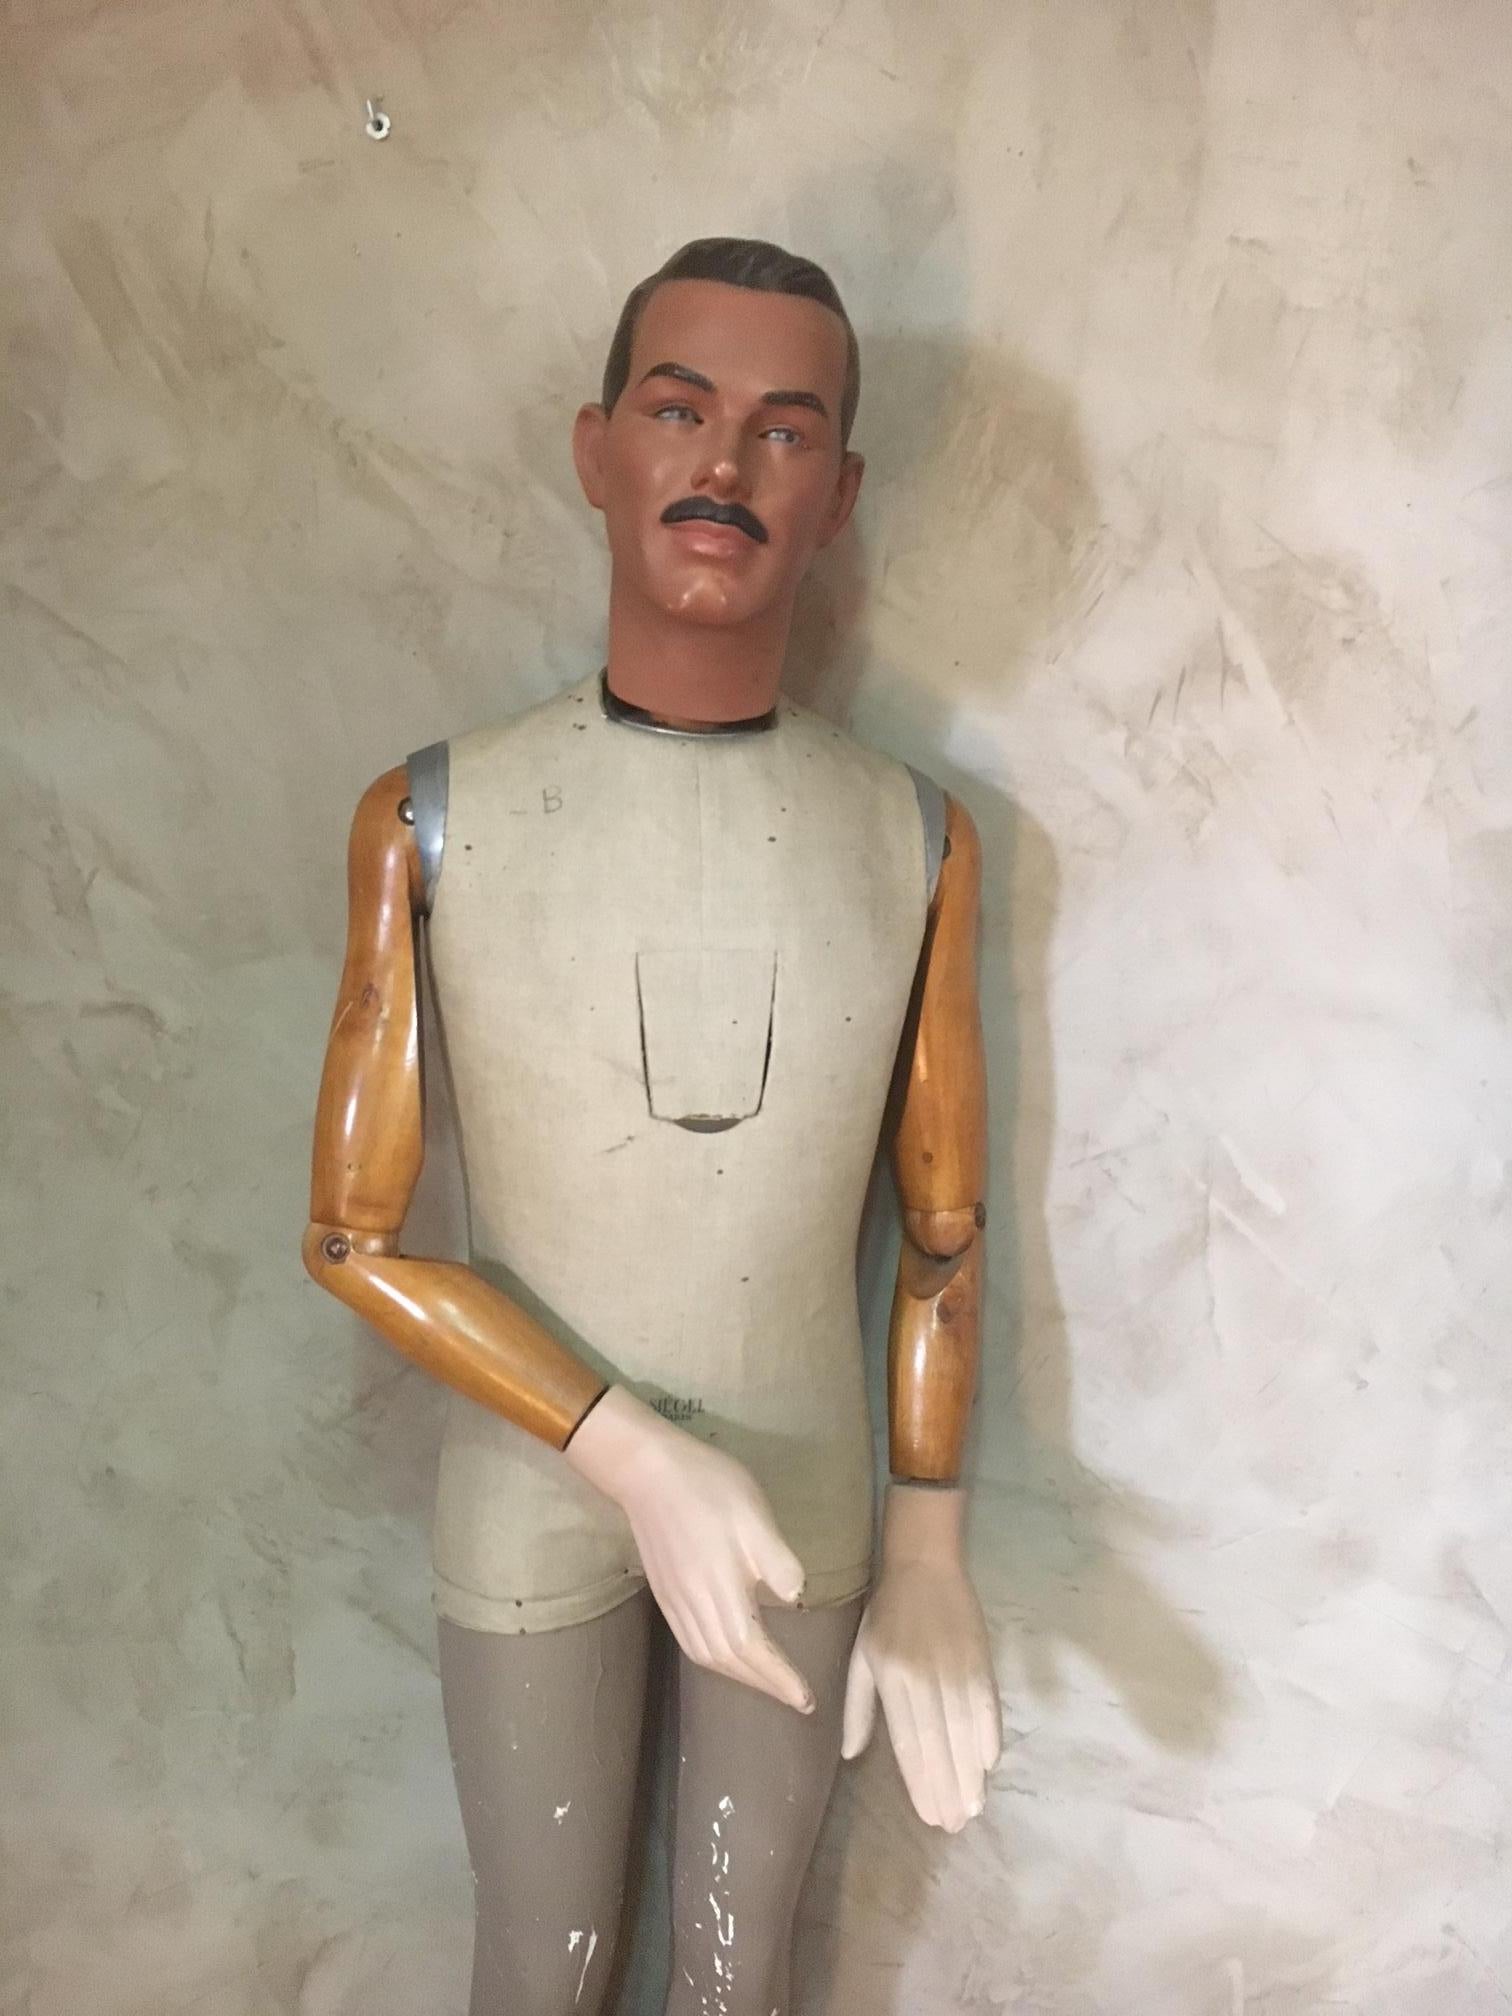 Very rare and beautiful life-size French Siegel plaster mannequin from the 1930s.
His has blue glass eyes. The arms are articulated. The hands and the head are removable.
His painted head can turn and look different directions.
There is a metal